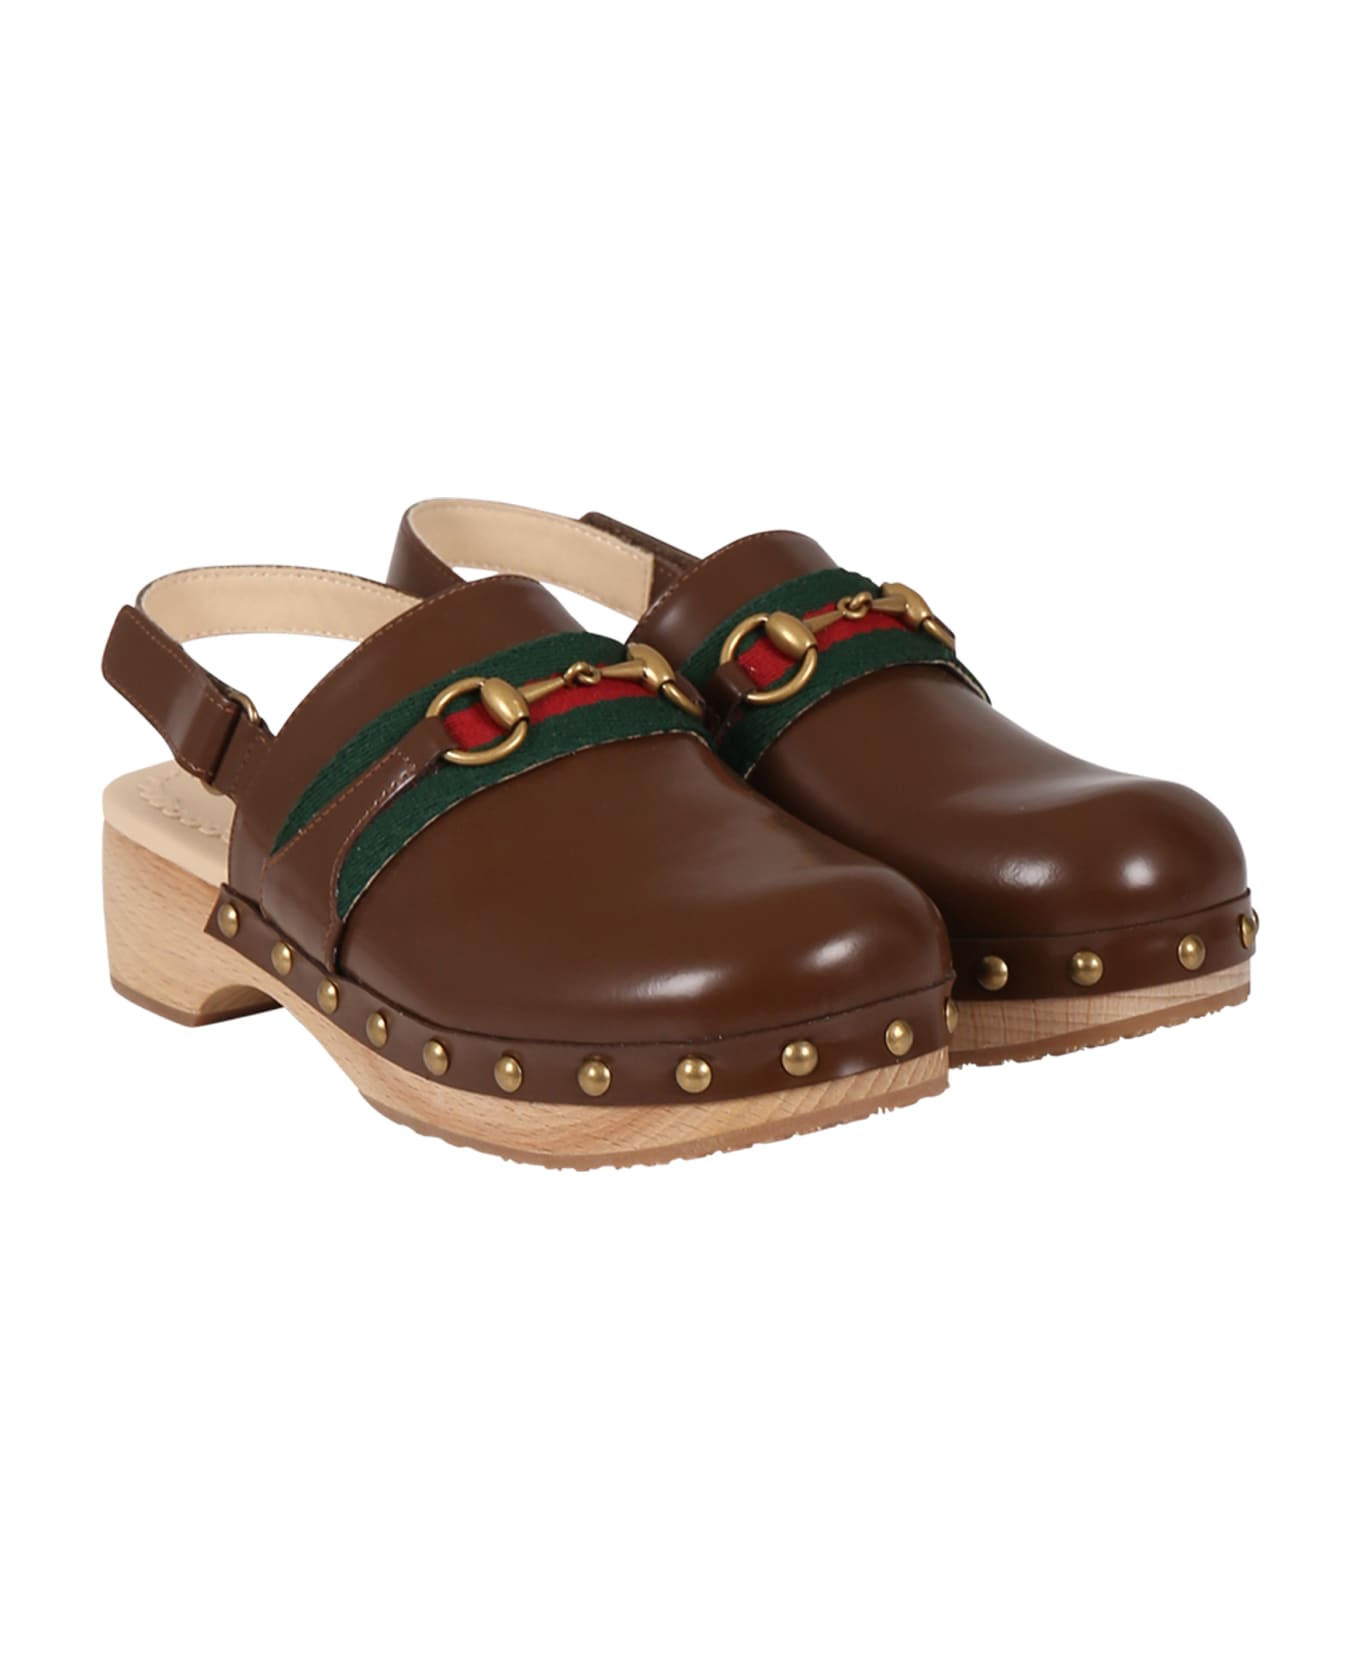 Gucci Bown Sabot For Girl With Iconic Horsebit - Brown シューズ